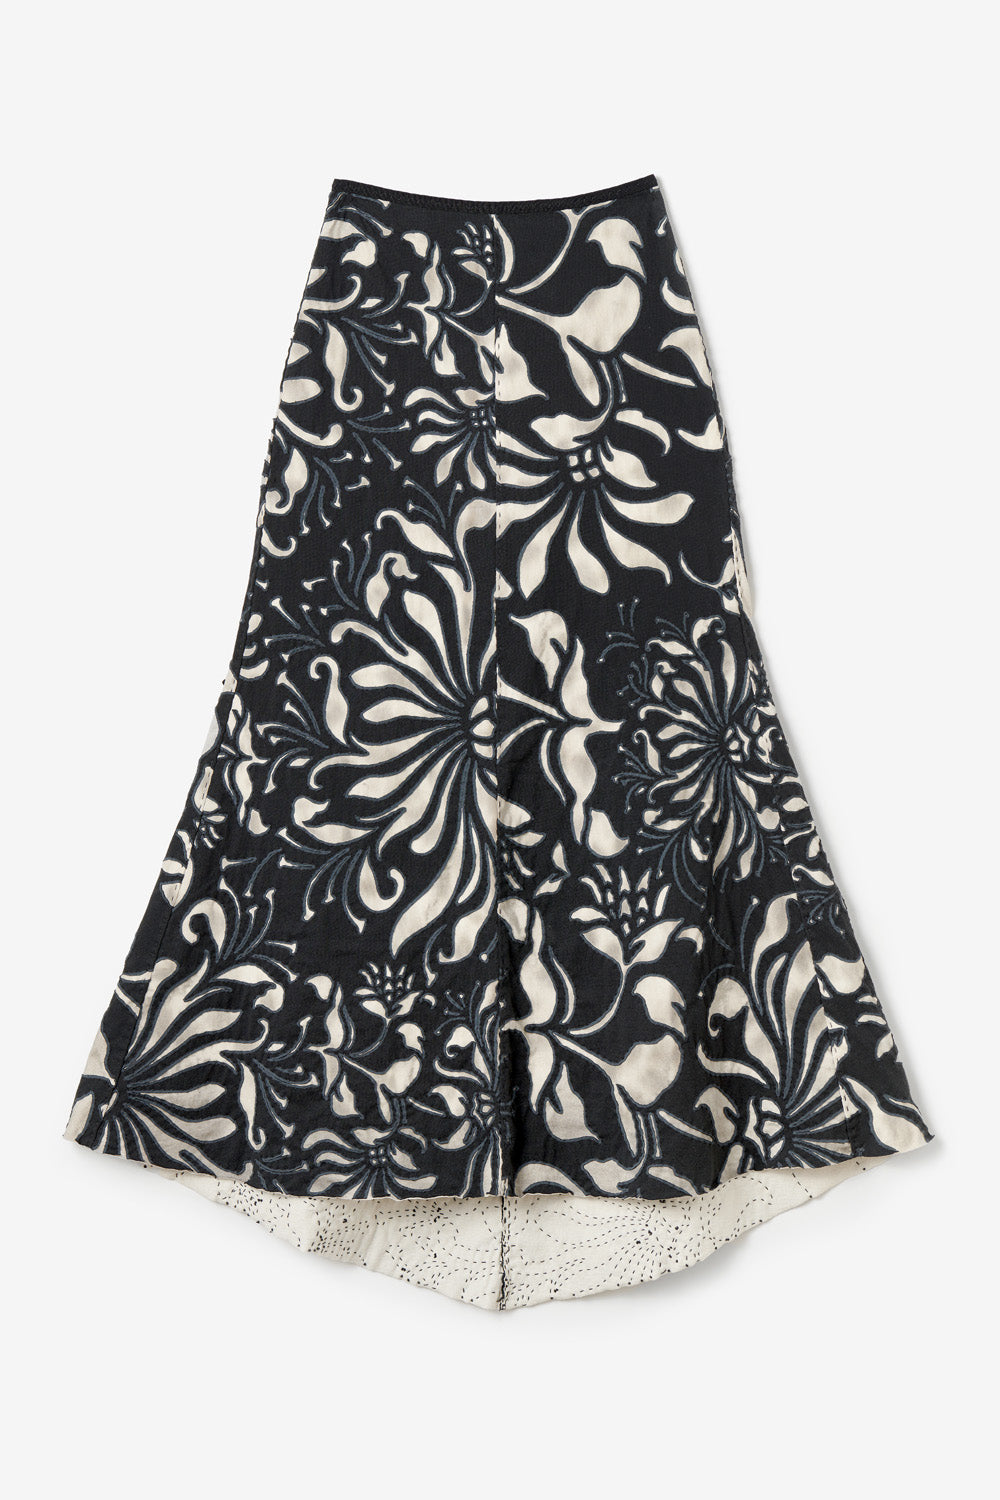 image of The Faded Maggie Long Skirt Kit